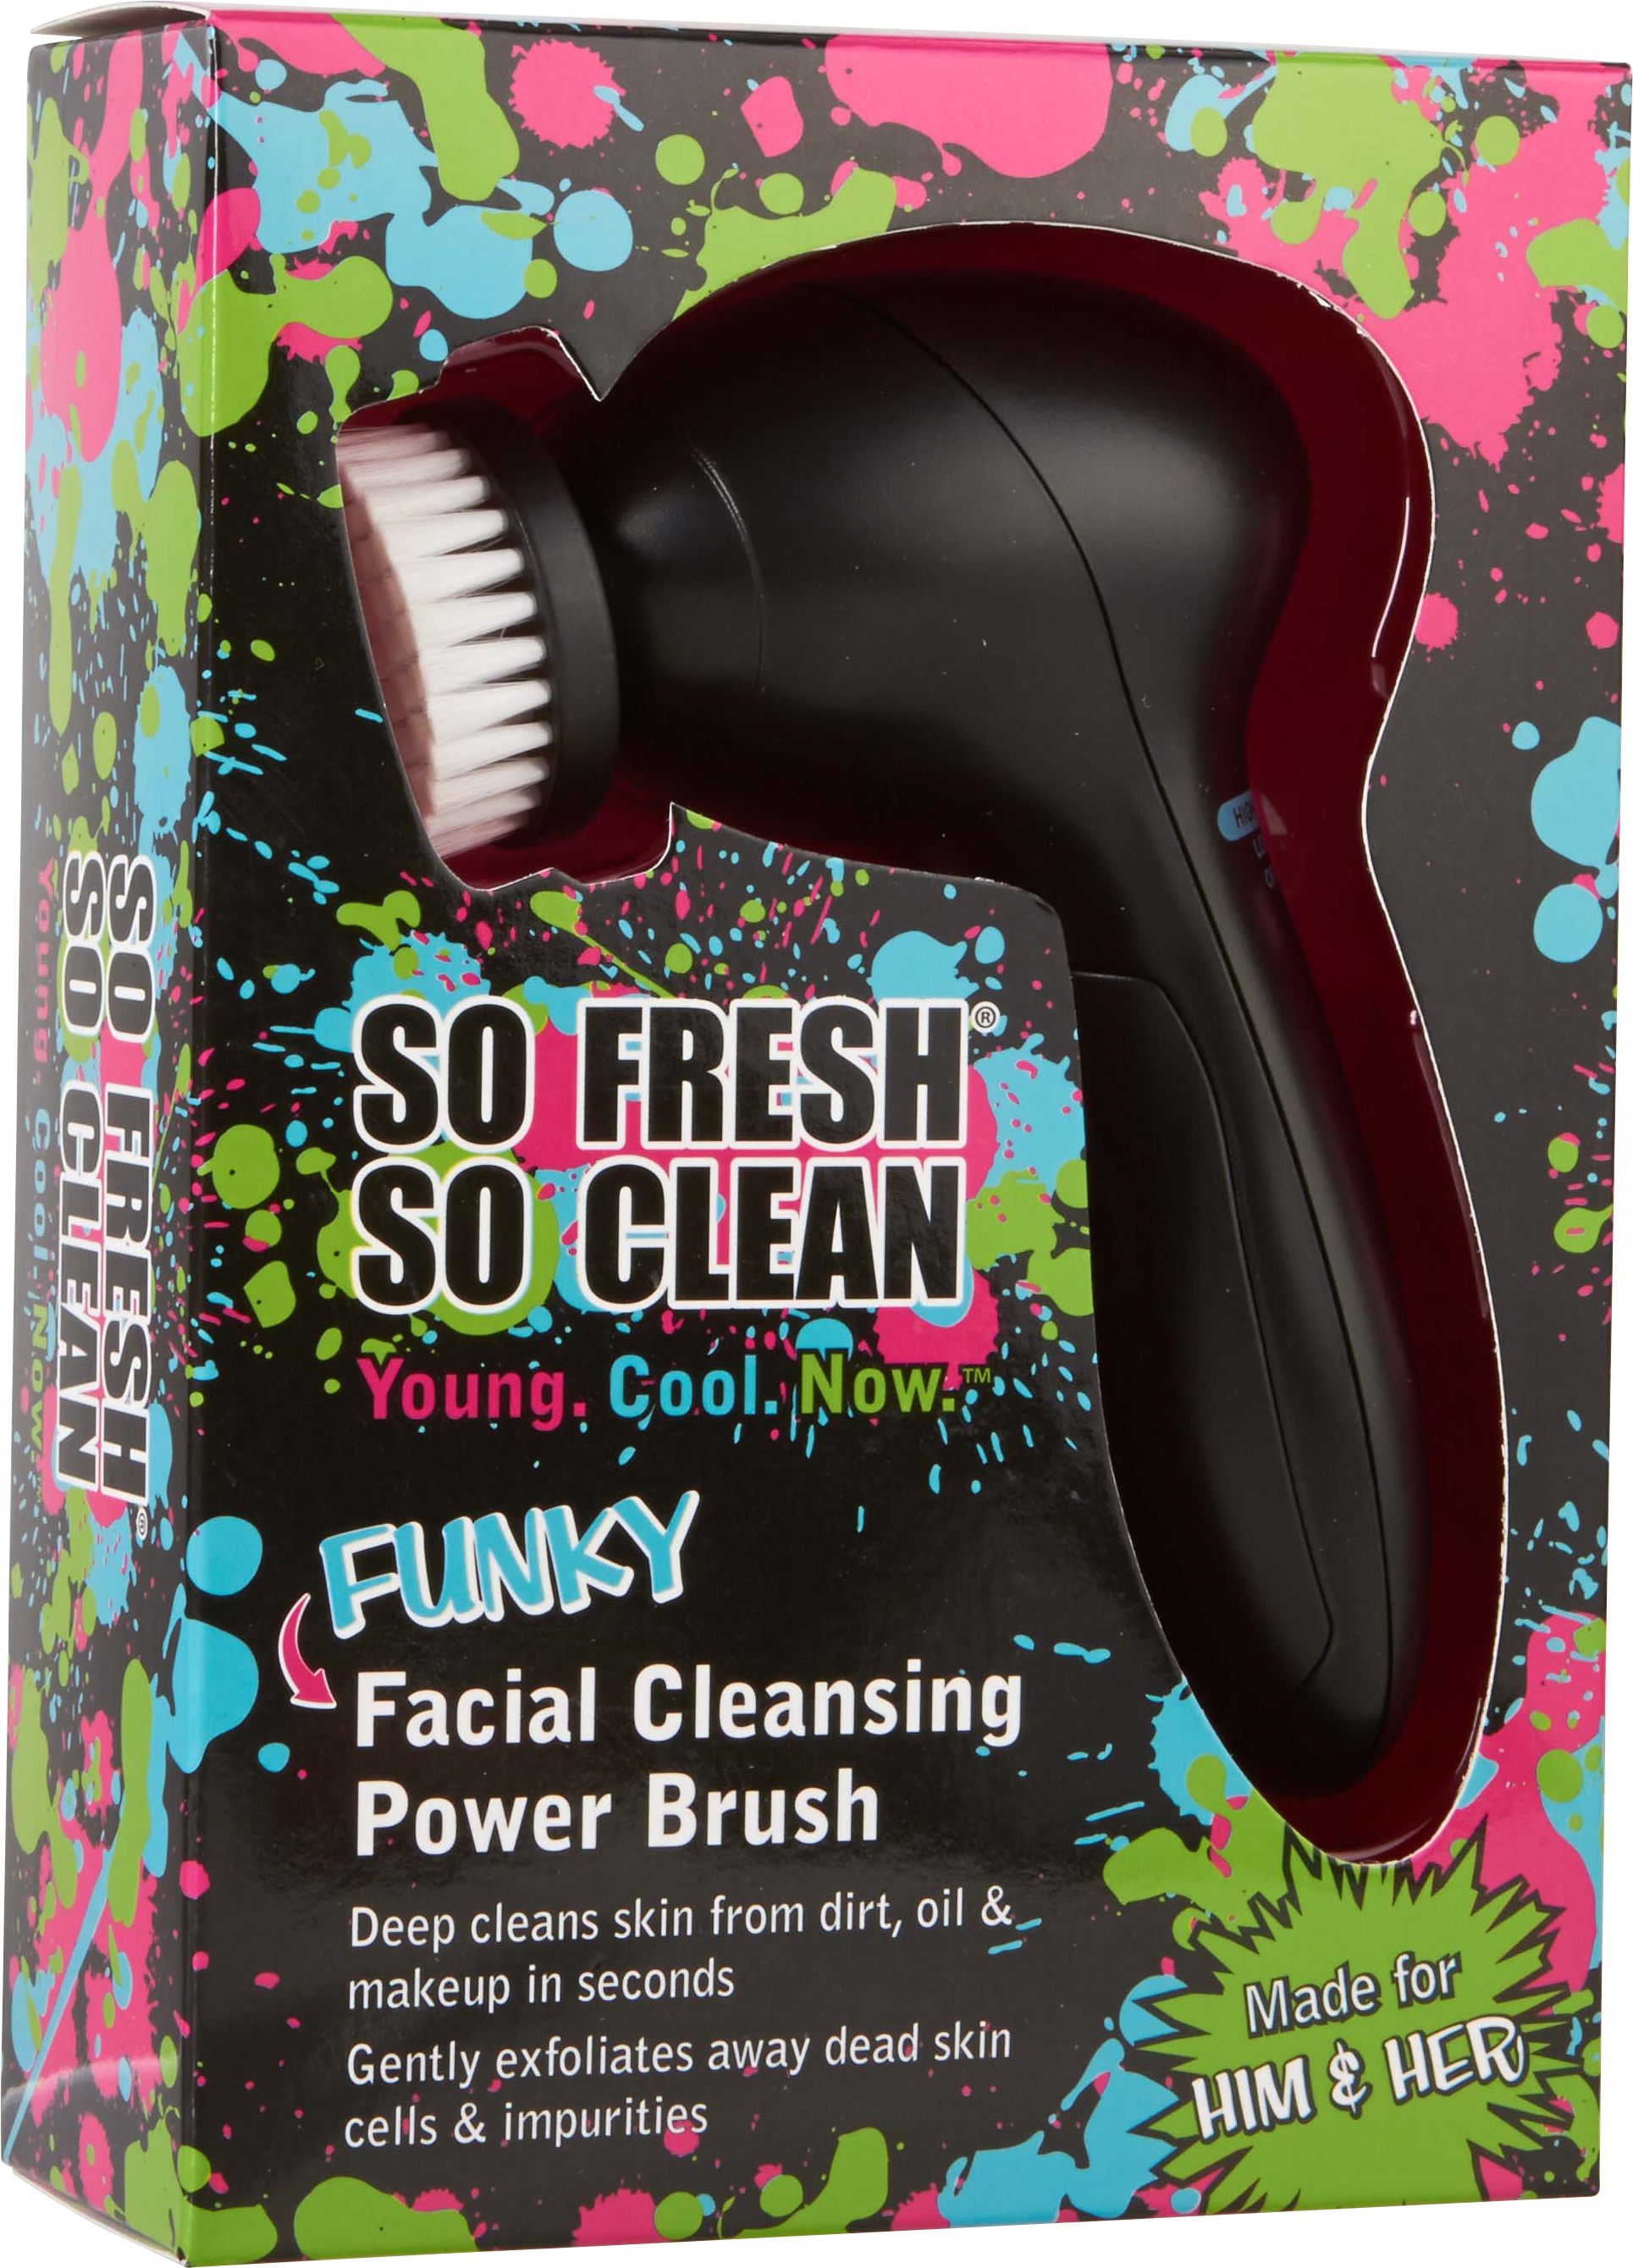 Funky Facial Cleansing Power Brush by Global Beauty Care